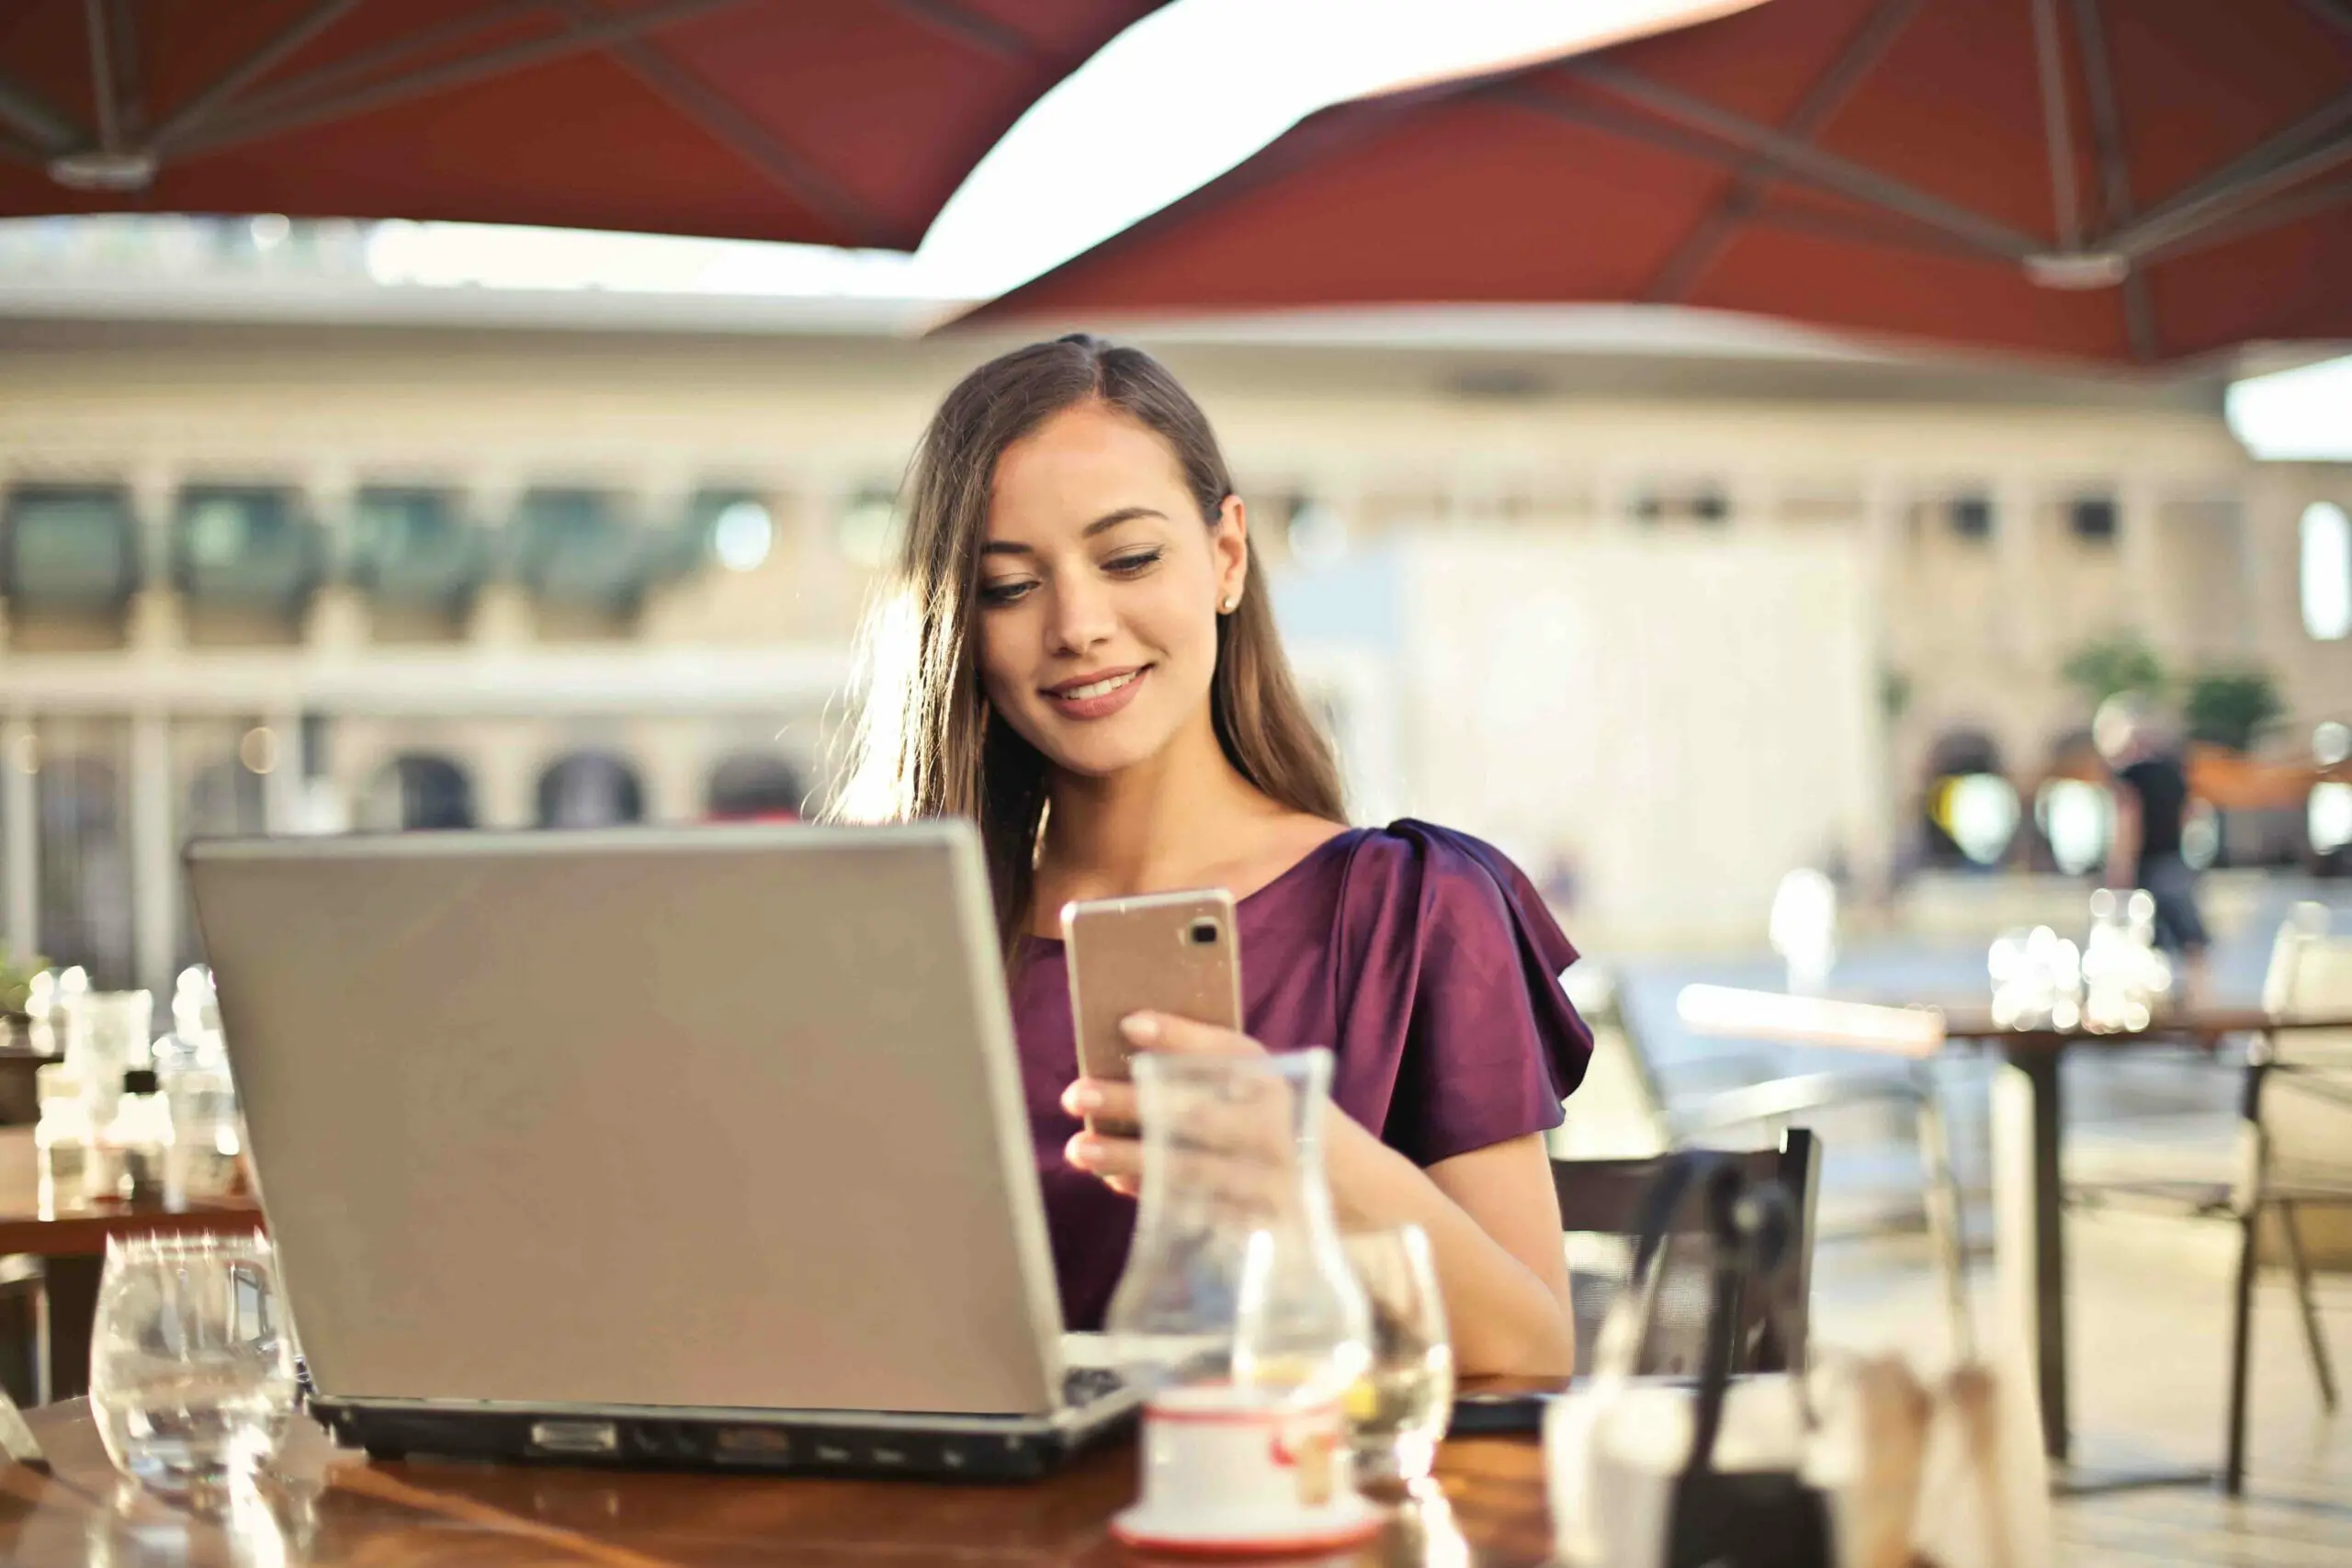 A woman at the coffee shop smiling while holding her phone and an open laptop on the table